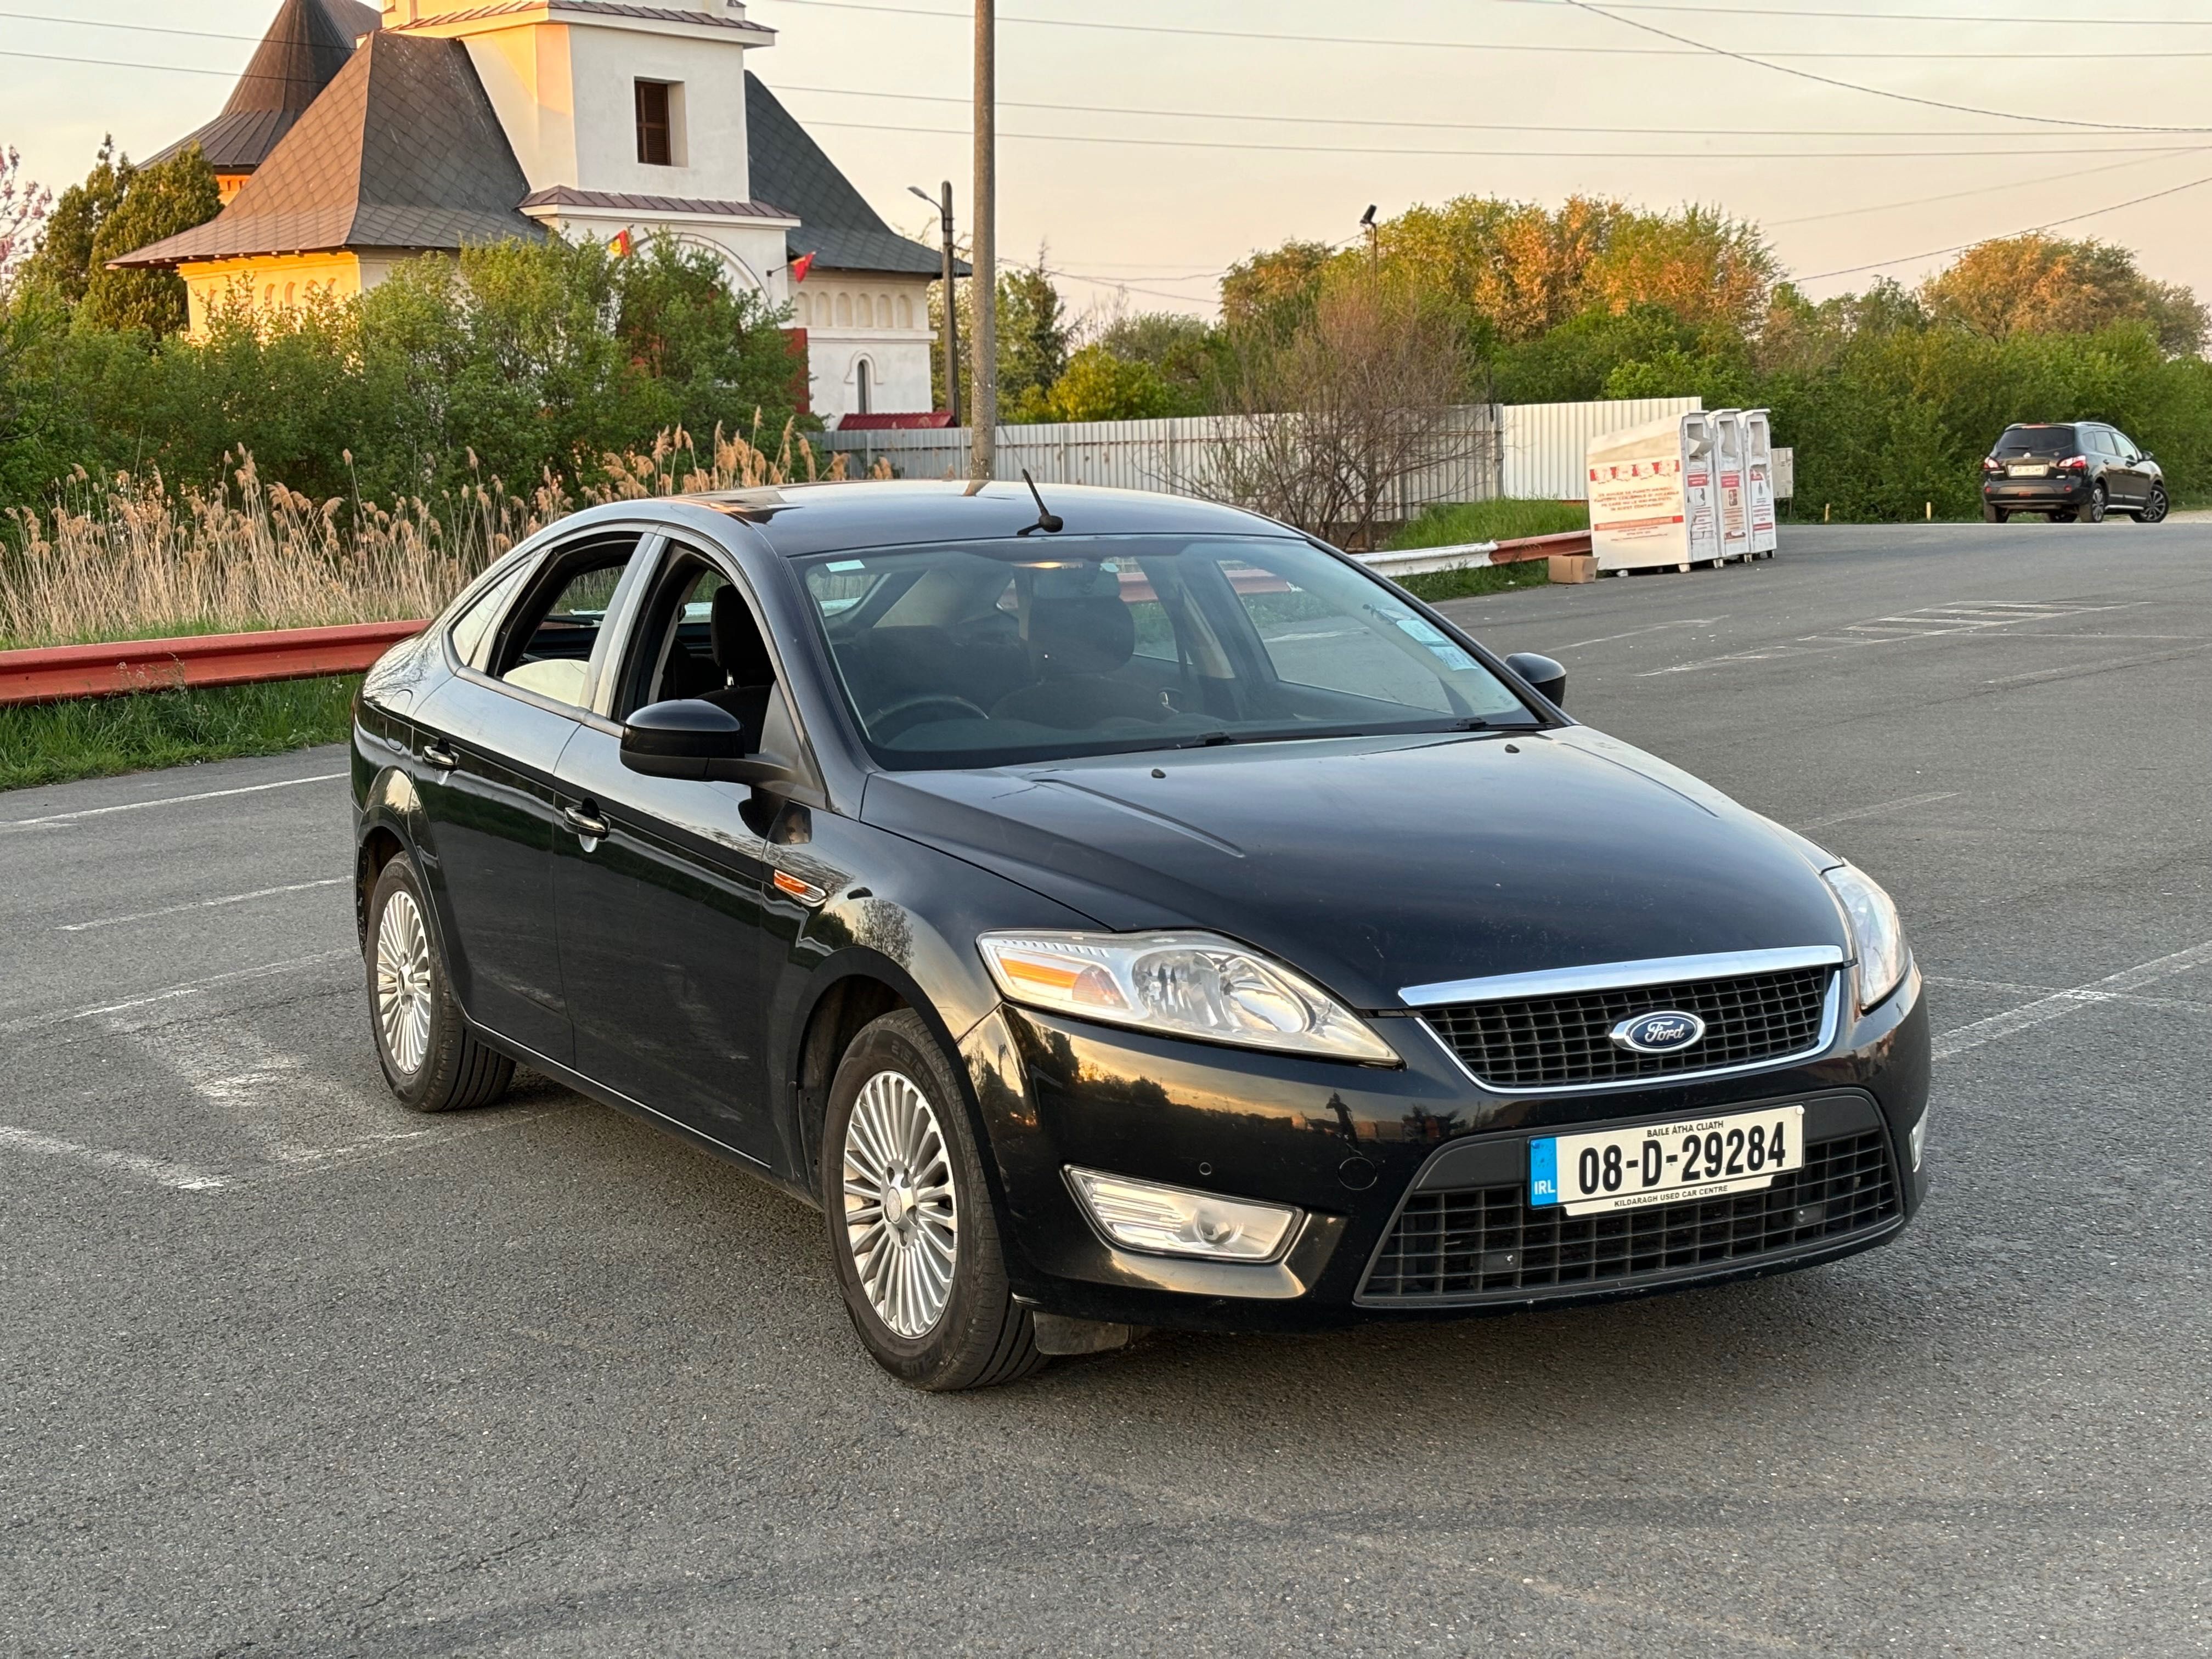 Ford mondeo 2.0 diesel tdci 2008 automatic